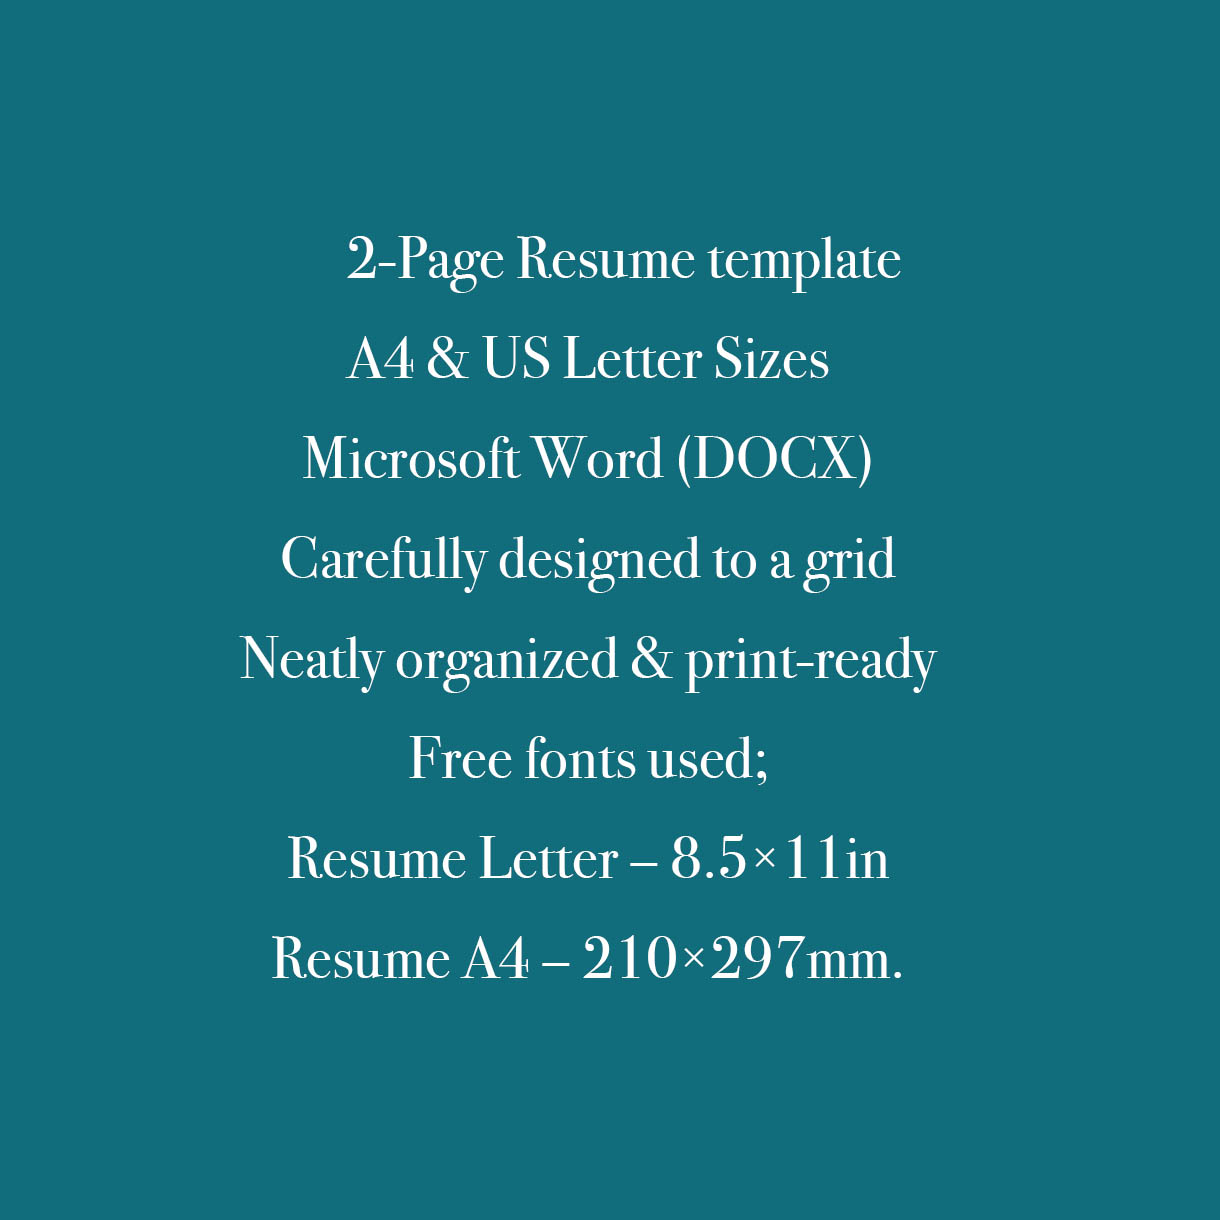 Hotel Resume Template CV cover image.